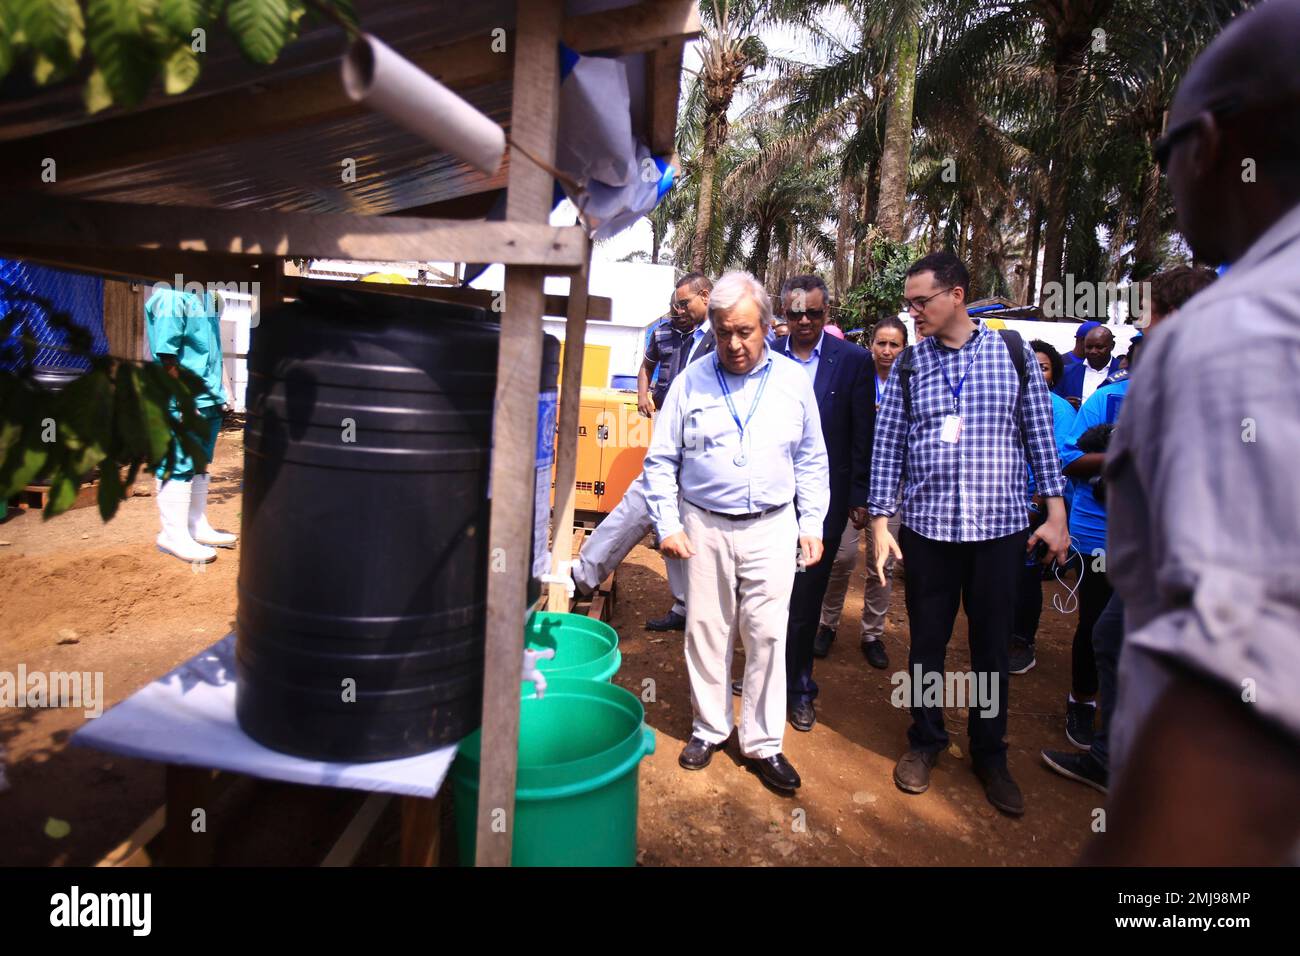 United Nations Secretary-General Antonio Guterres visits an Ebola center in  Beni, eastern Congo Sunday, Sept. 1, 2019. Guterres is starting a three-day  visit to Congo to see the work of UN peacekeepers,